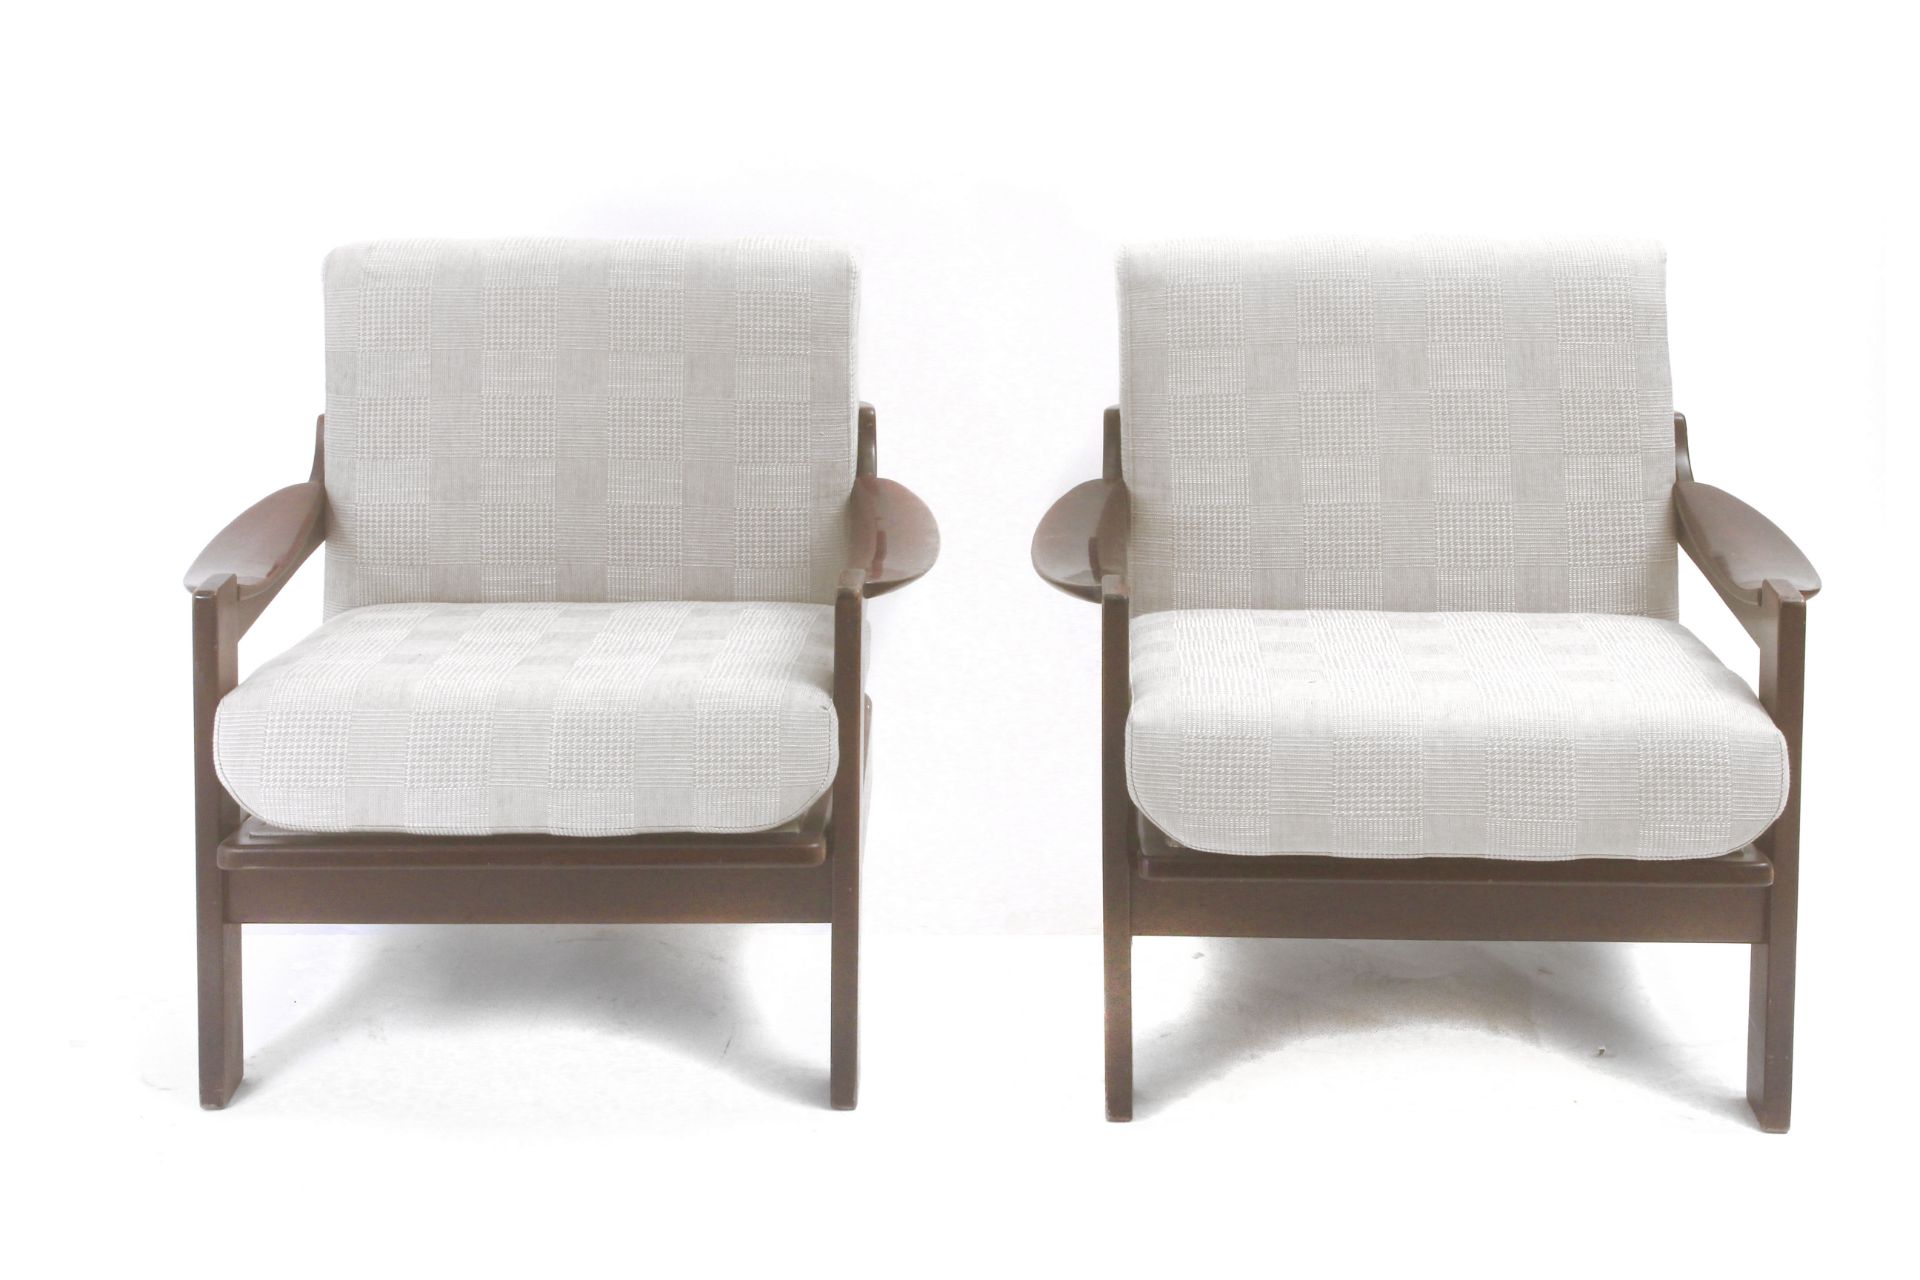 AG Barcelona. A pair of walnut armchairs circa 1970 - Image 10 of 10